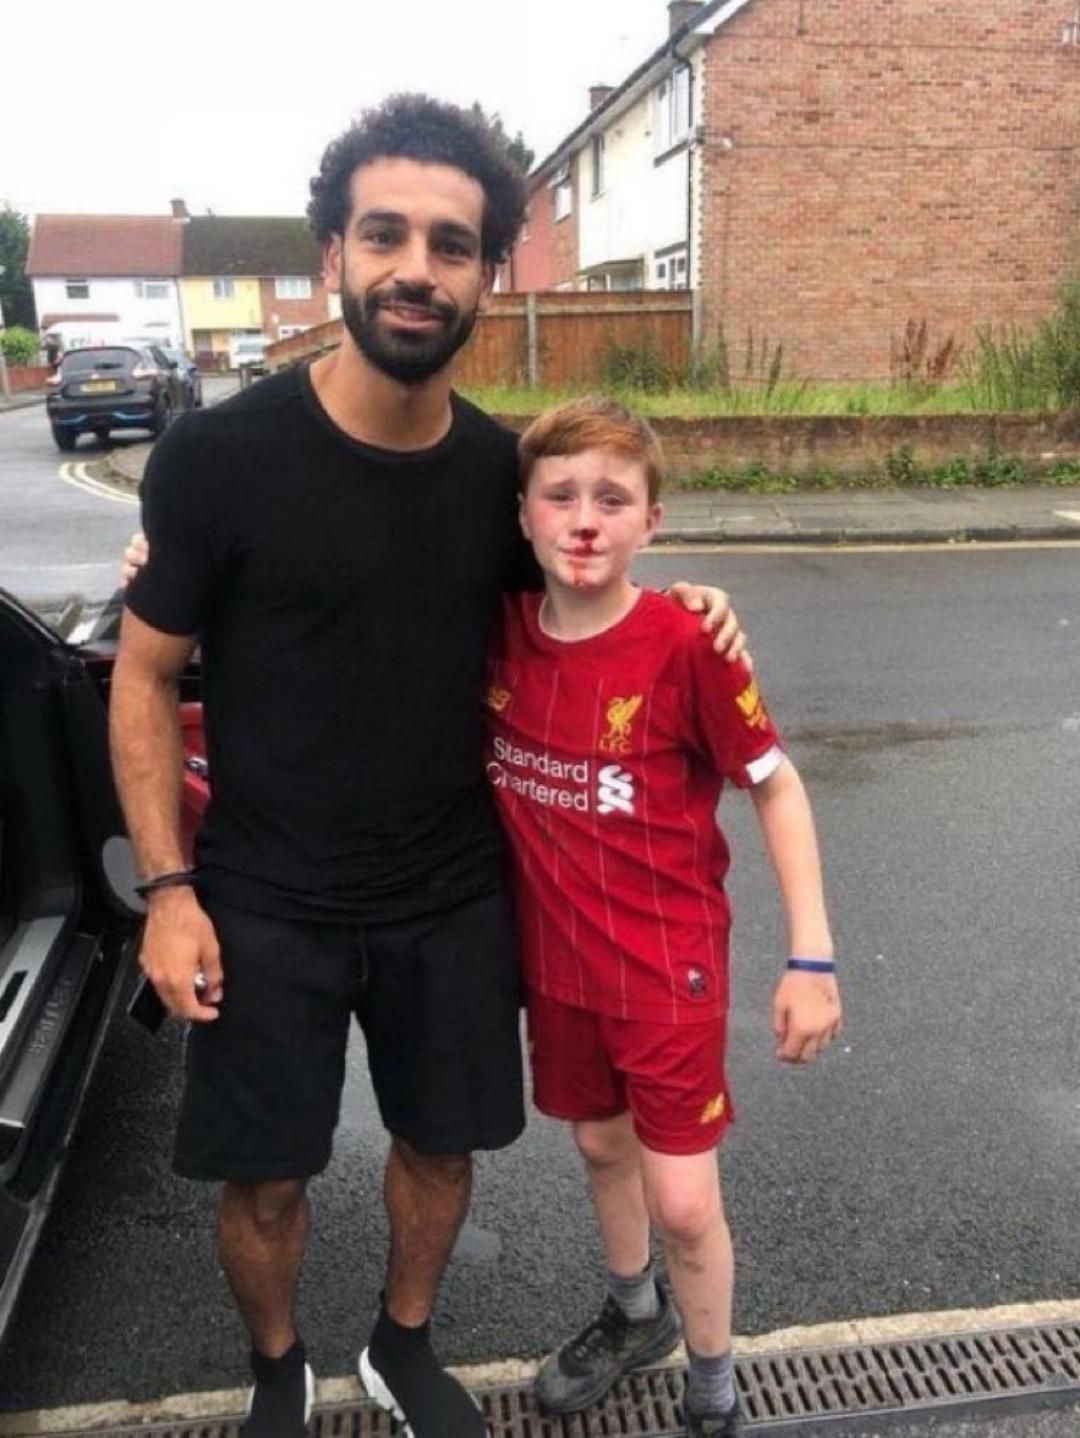 Throwback to when Mo Salah beat up a young Evertonian and forced him to wear a Liverpool kit.